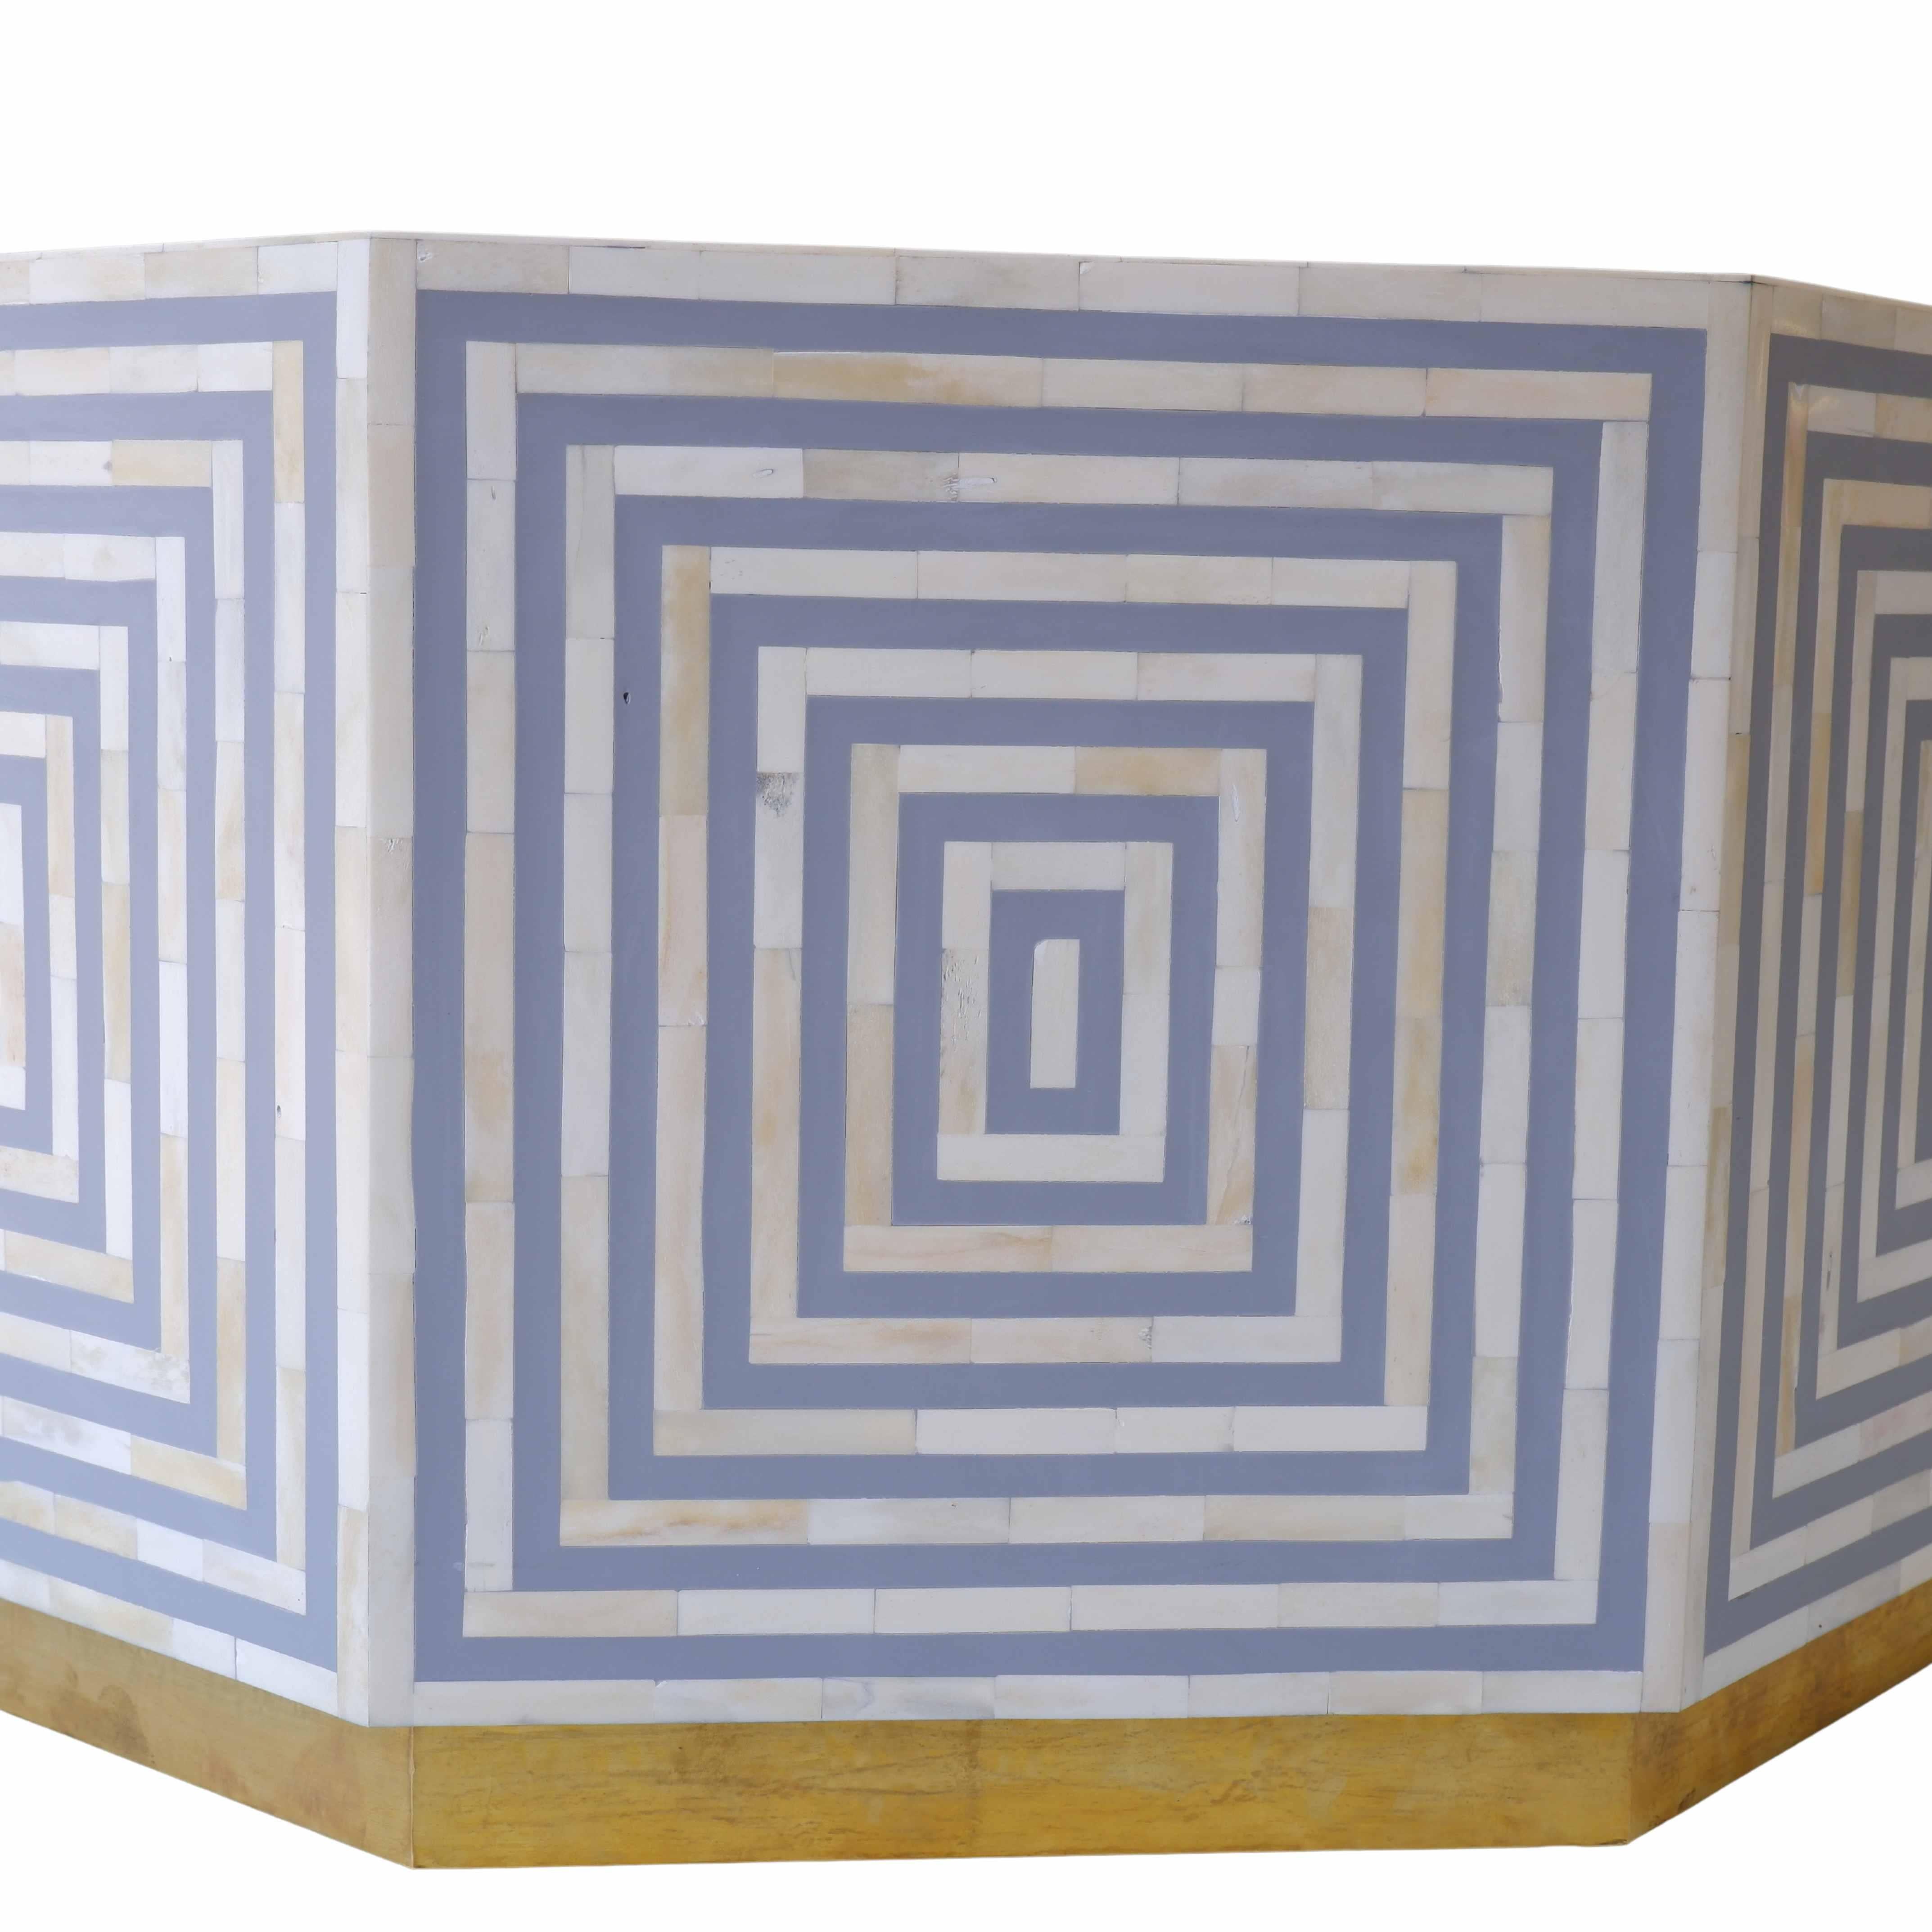 A grey octave coffee table with an eight-face bone inlay line design is a striking piece that seamlessly combines geometric elegance with intricate craftsmanship. The octagonal shape adds a unique twist to the traditional coffee table silhouette,